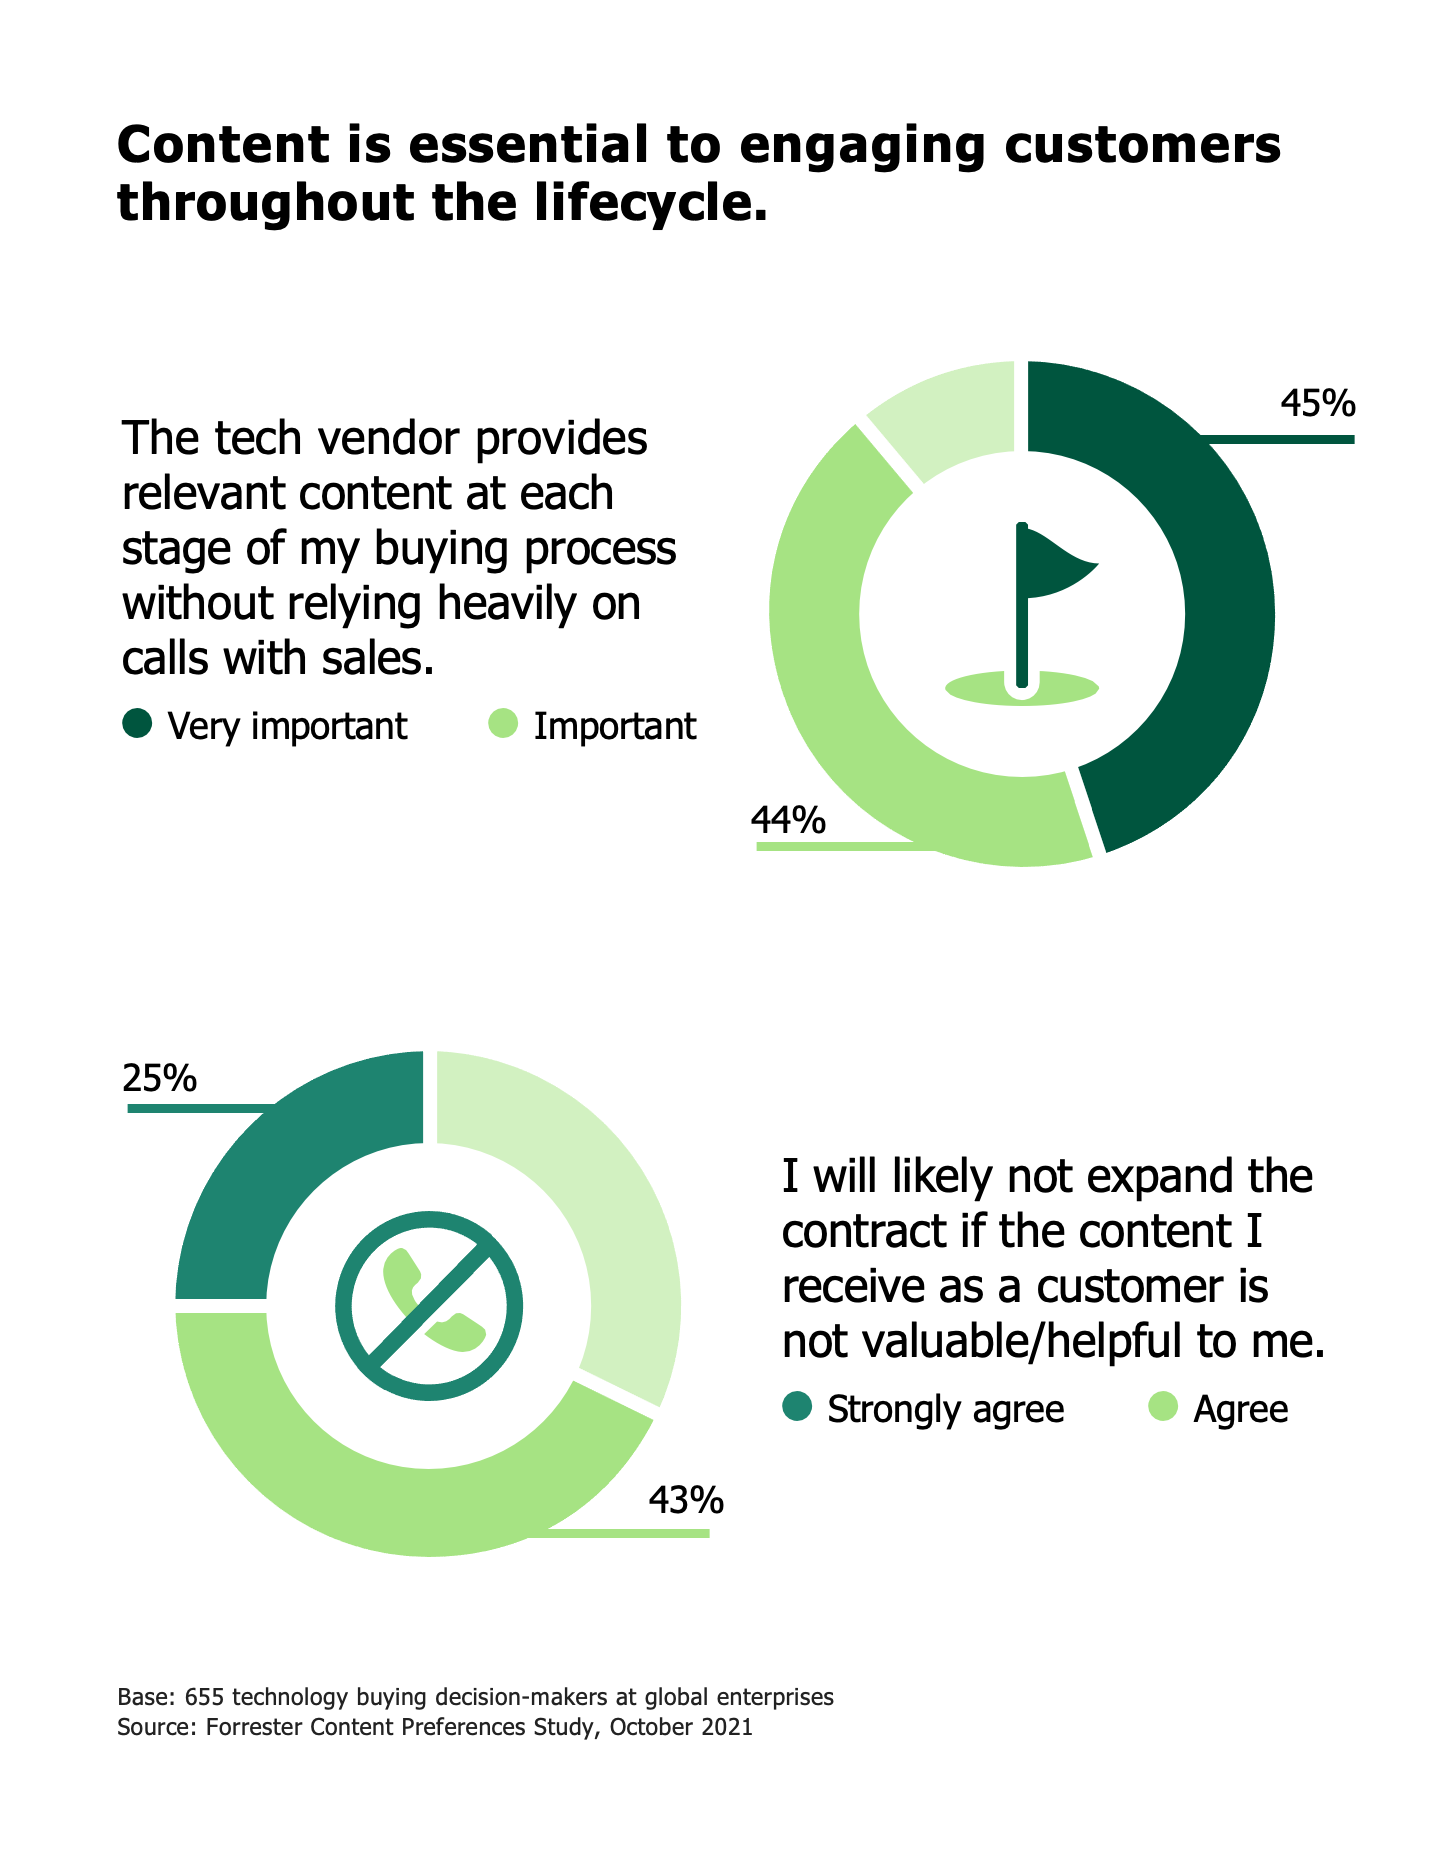 Content is essential to engaging technology buyers throughout the lifecycle